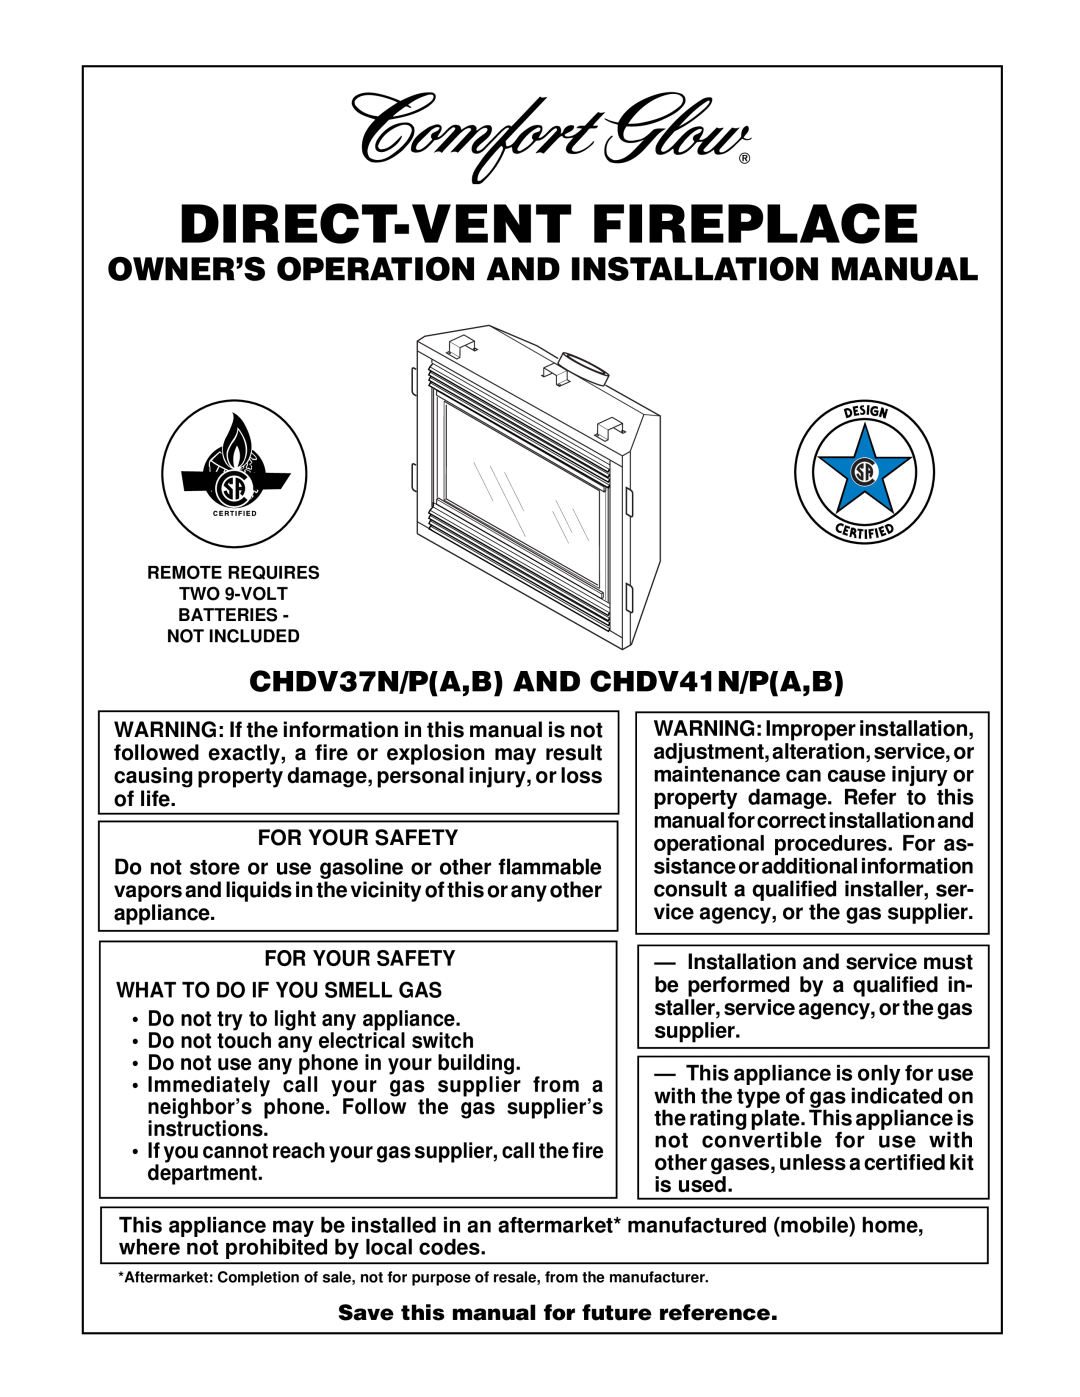 Desa installation manual Owner’S Operation And Installation Manual, CHDV37N/PA,B AND CHDV41N/PA,B, For Your Safety 